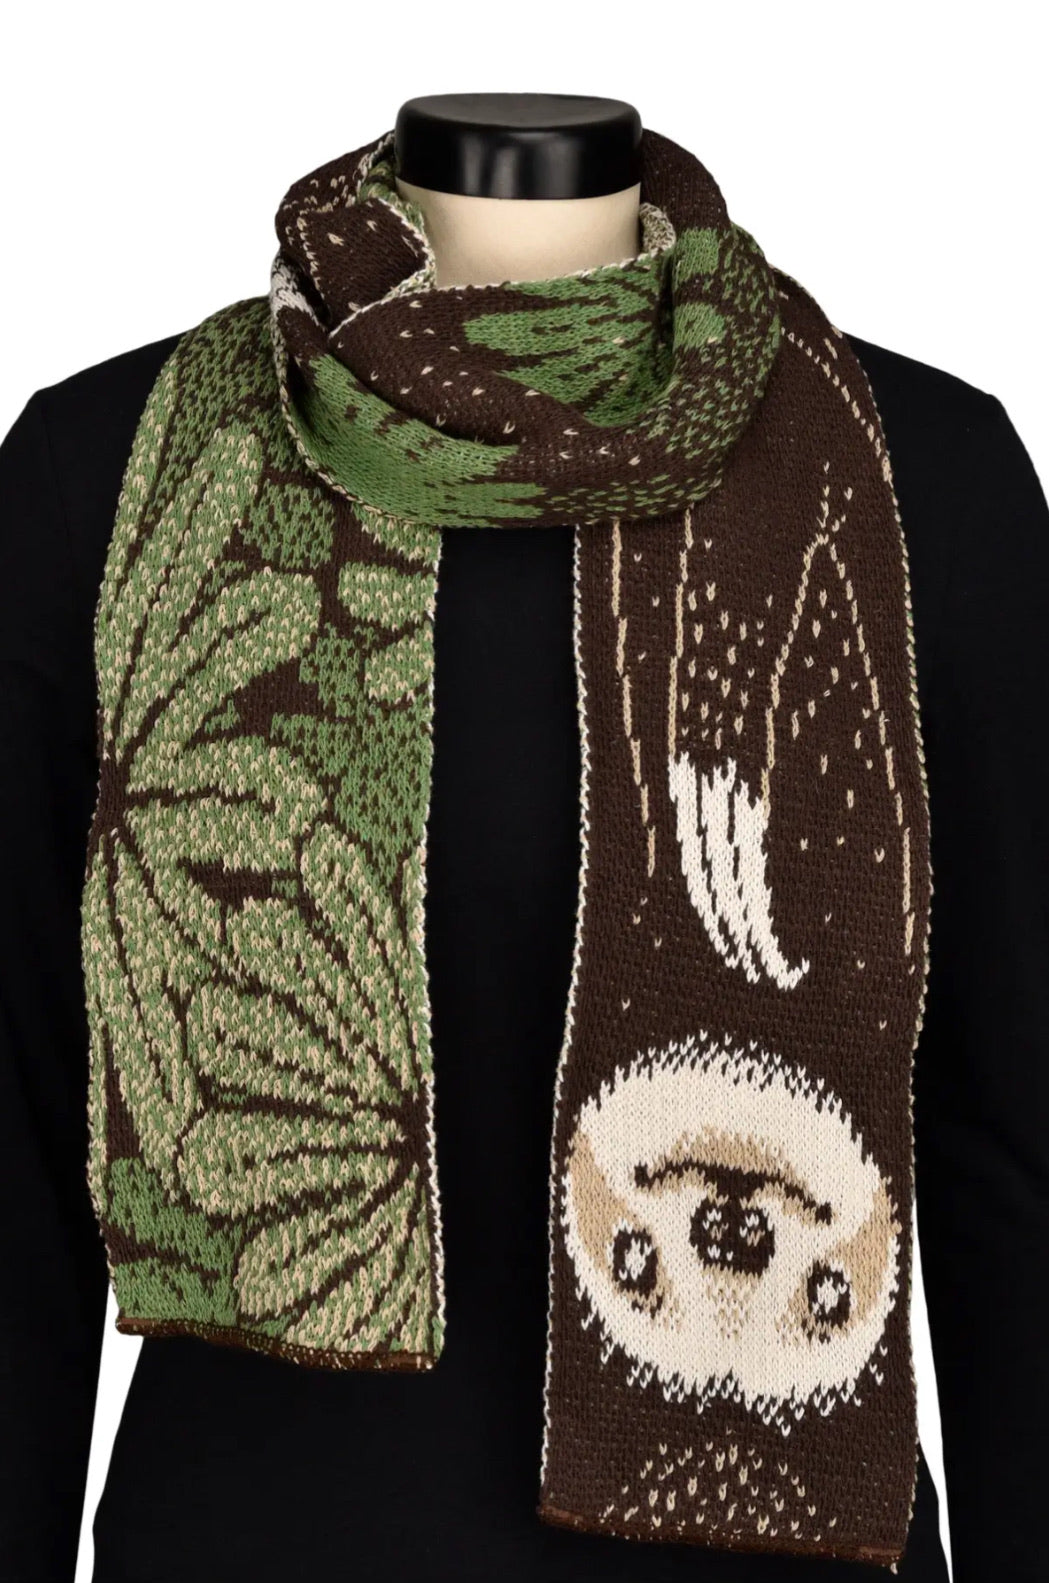 Women's Recycled Cotton Sweater Knit Fashion Scarf - Sloth